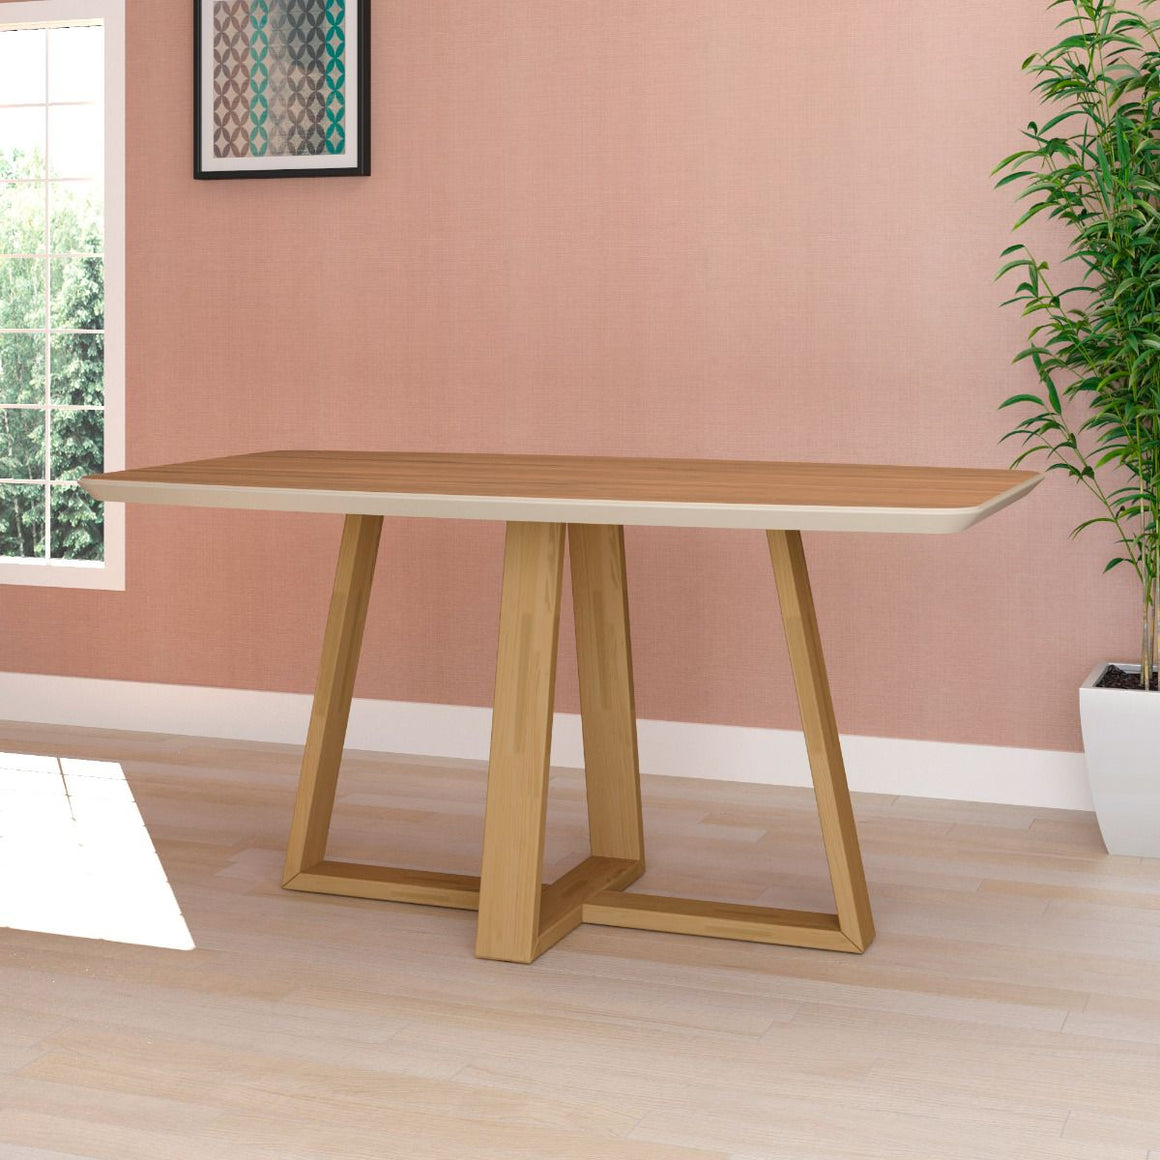 Duffy 62.99 Modern Rectangle Dining Table with Space for 6 in Cinnamon and Off White